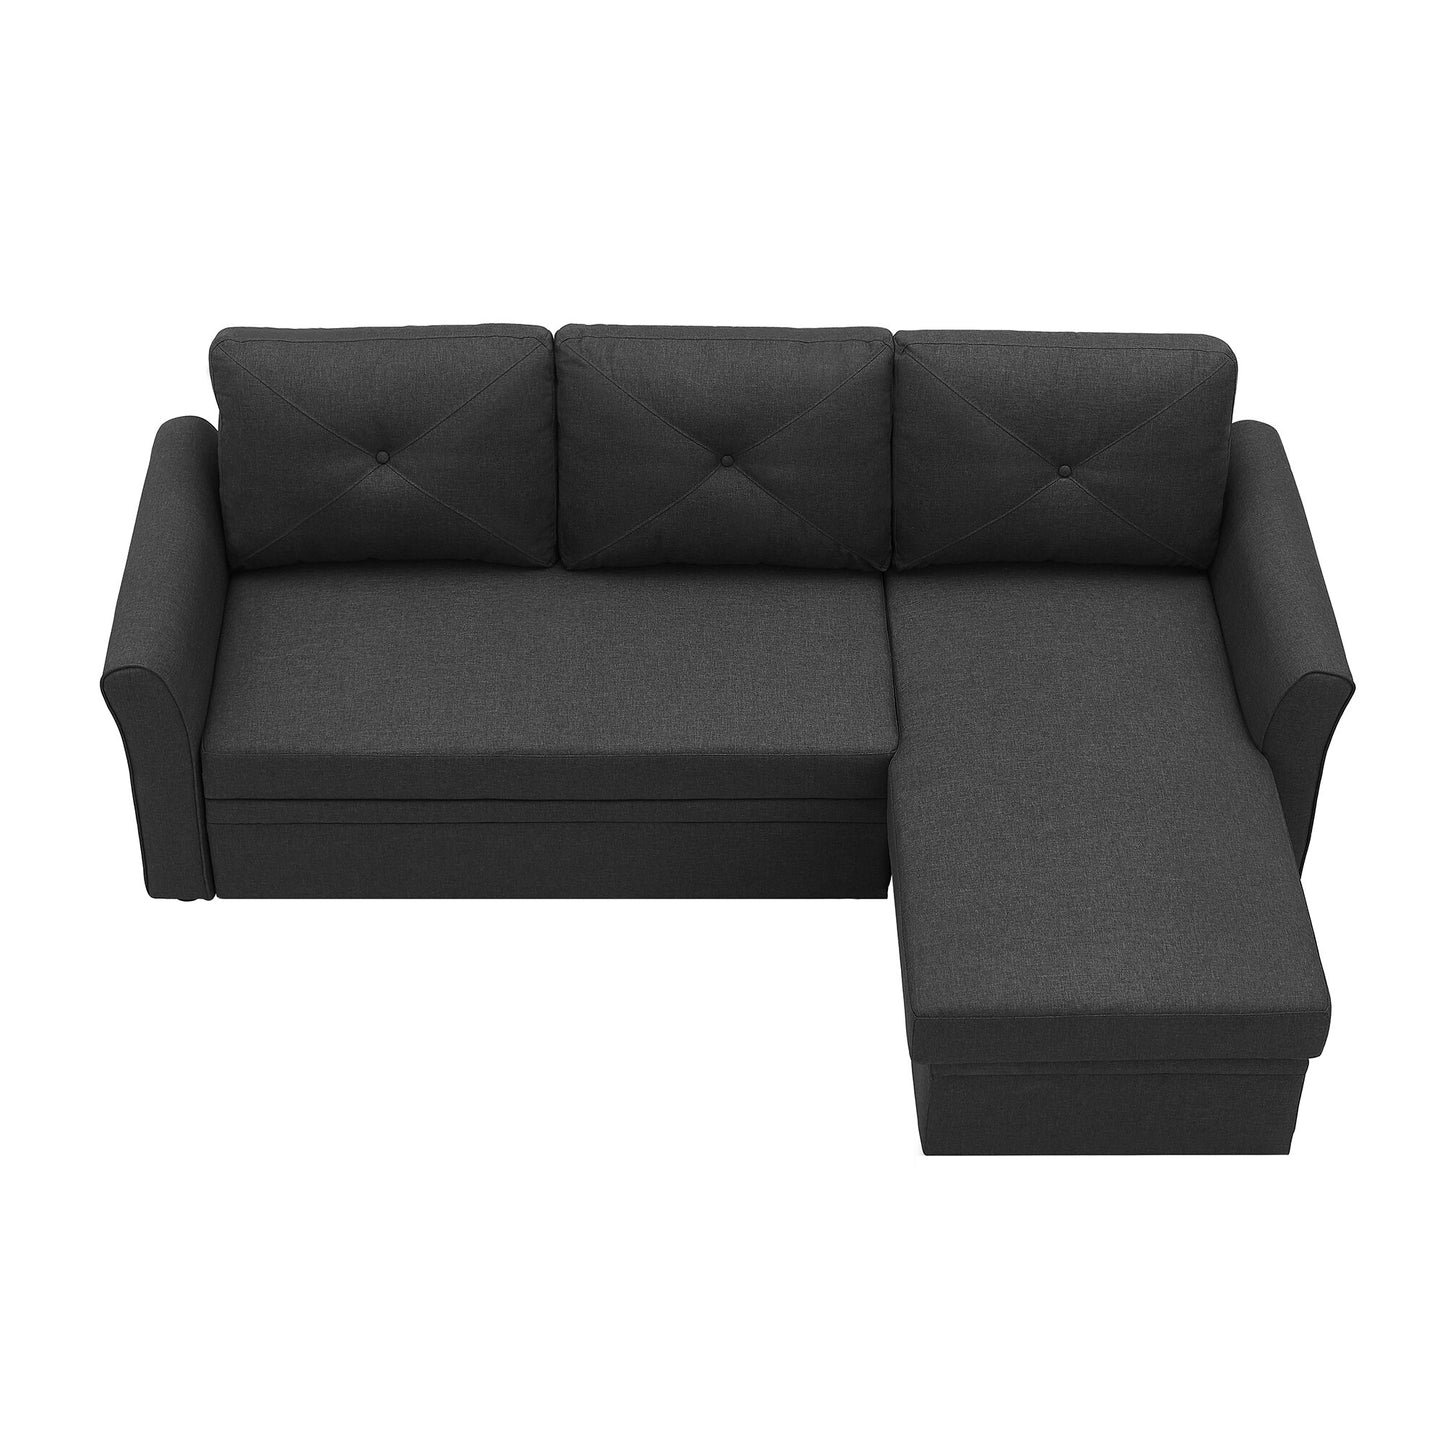 Three Colors 83" L-Shape 3 Seat Sectional Couch Pull Out Sleeper Sofa Reversible  with Storage for Living Room Furniture Set